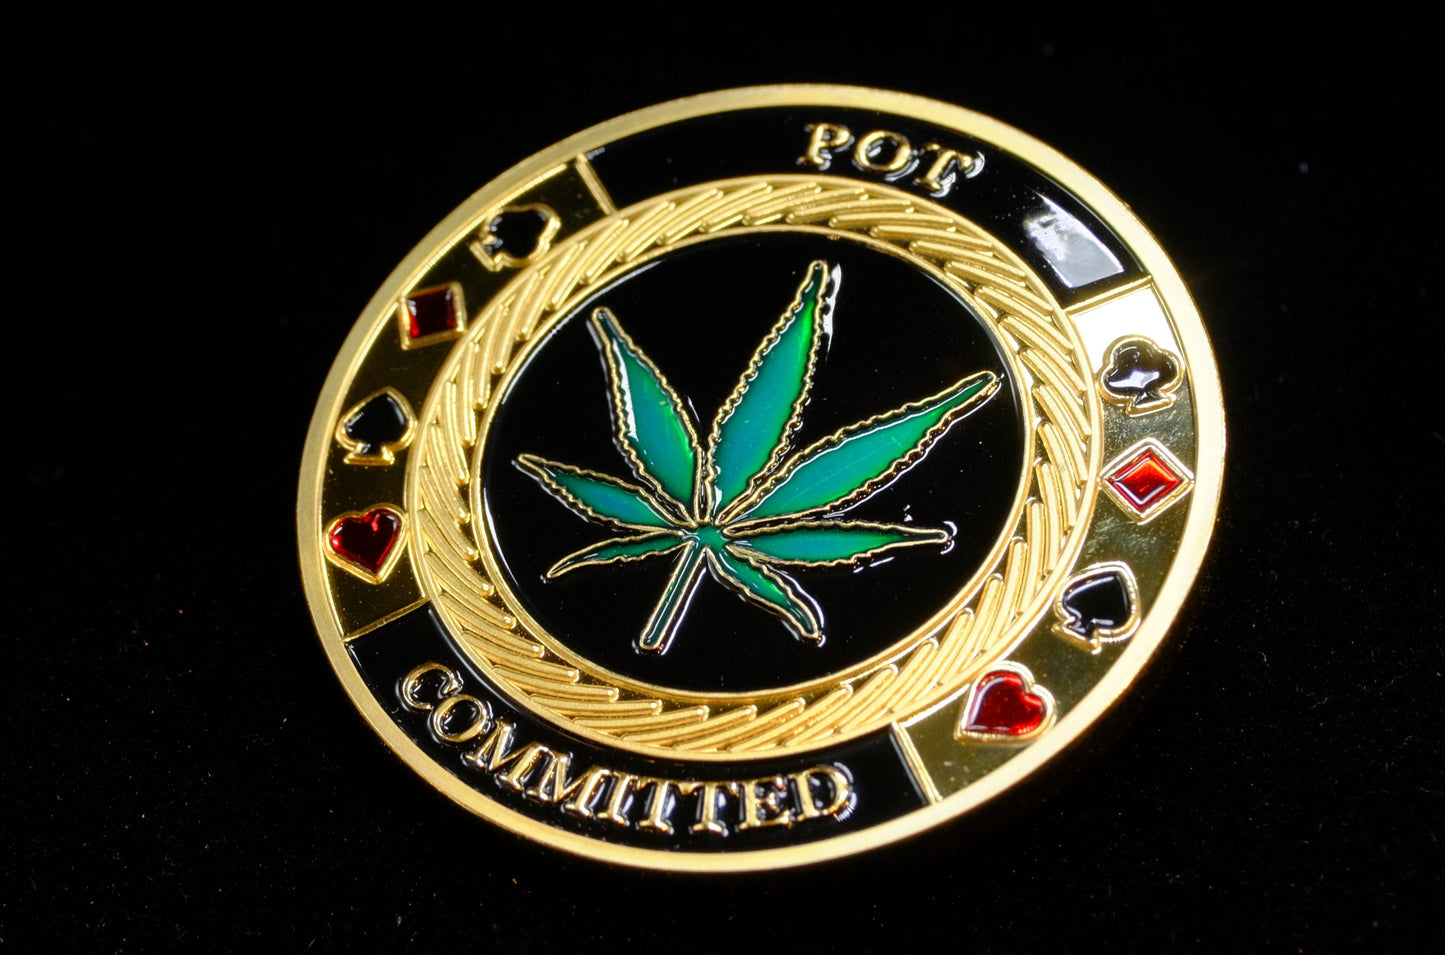 Pot Committed Coin